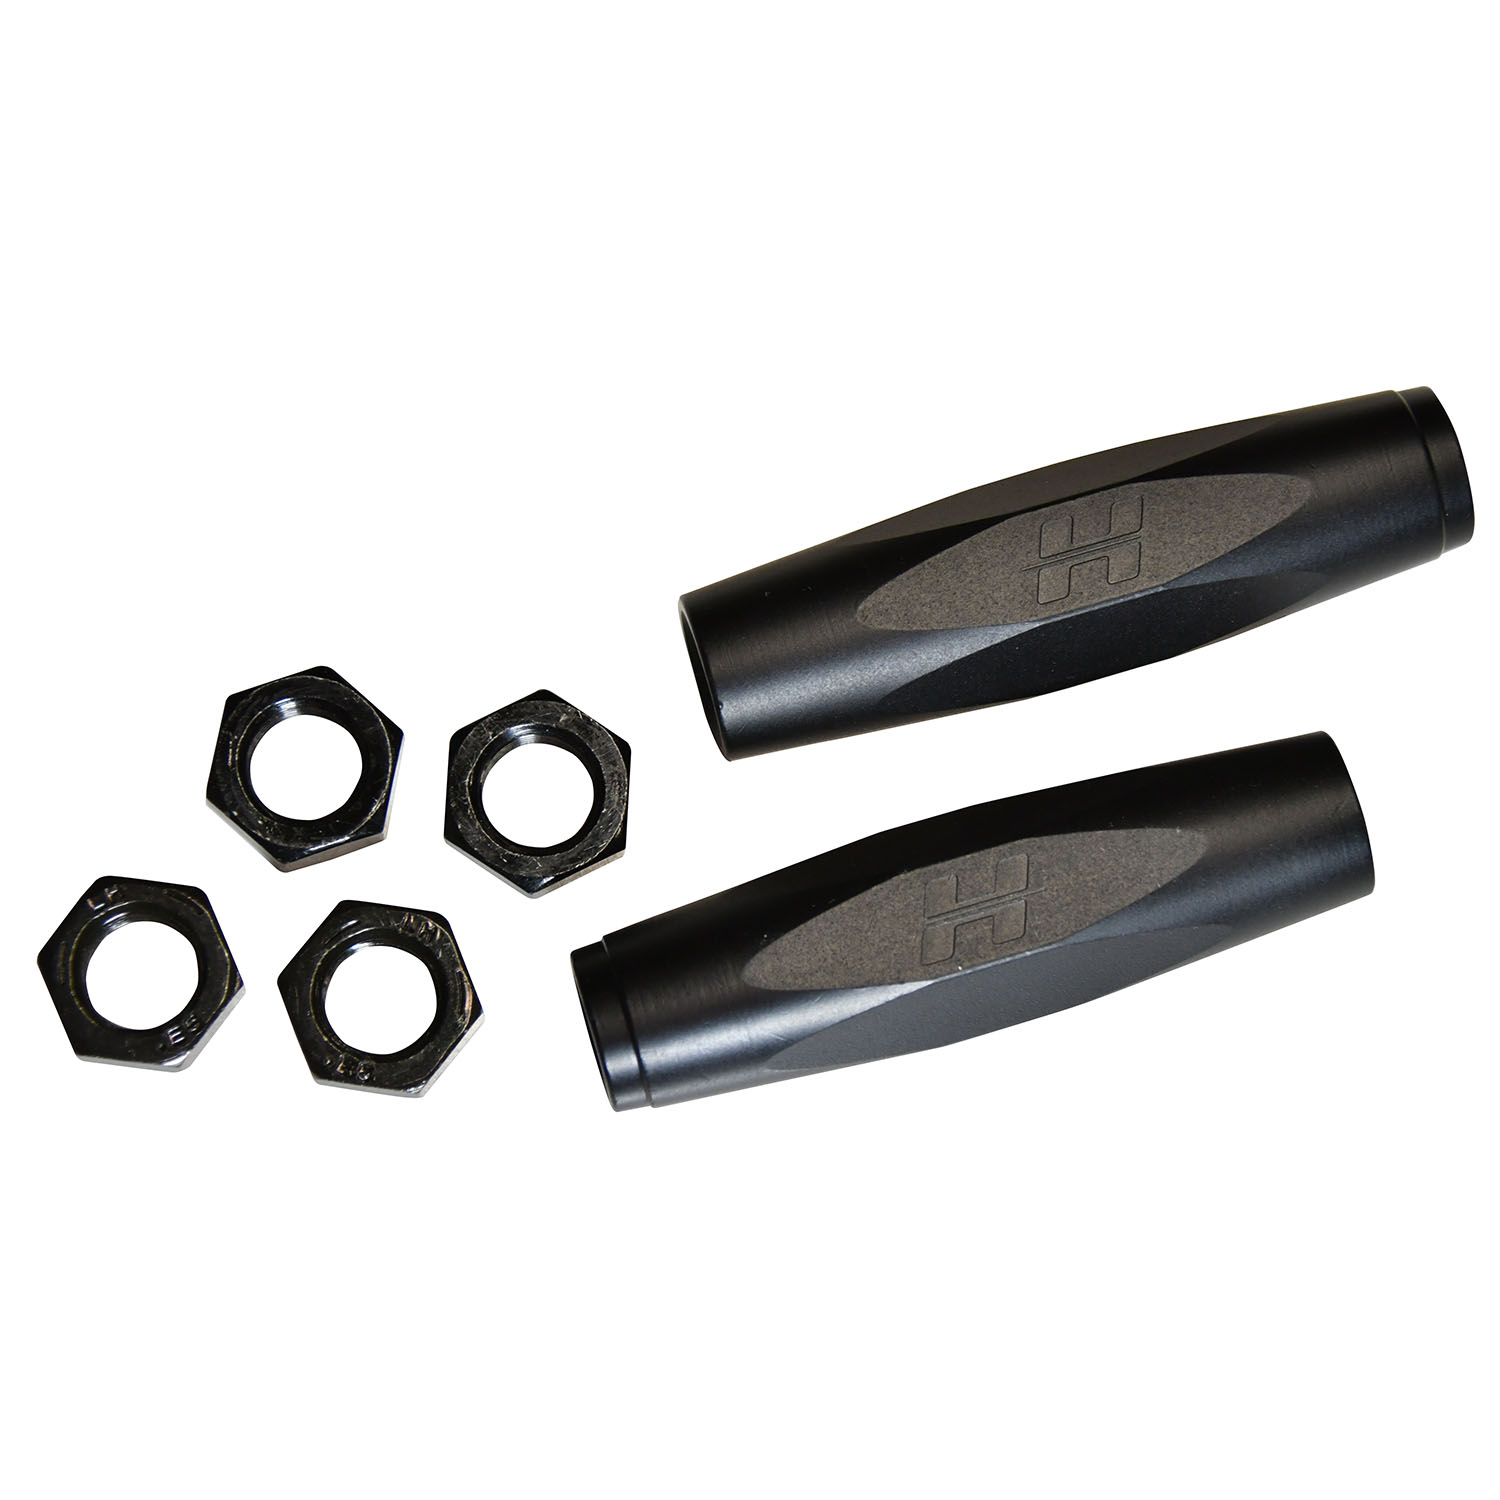 5/8 inch Machined Tie Rod Sleeves from Hotchkis Sport Suspension